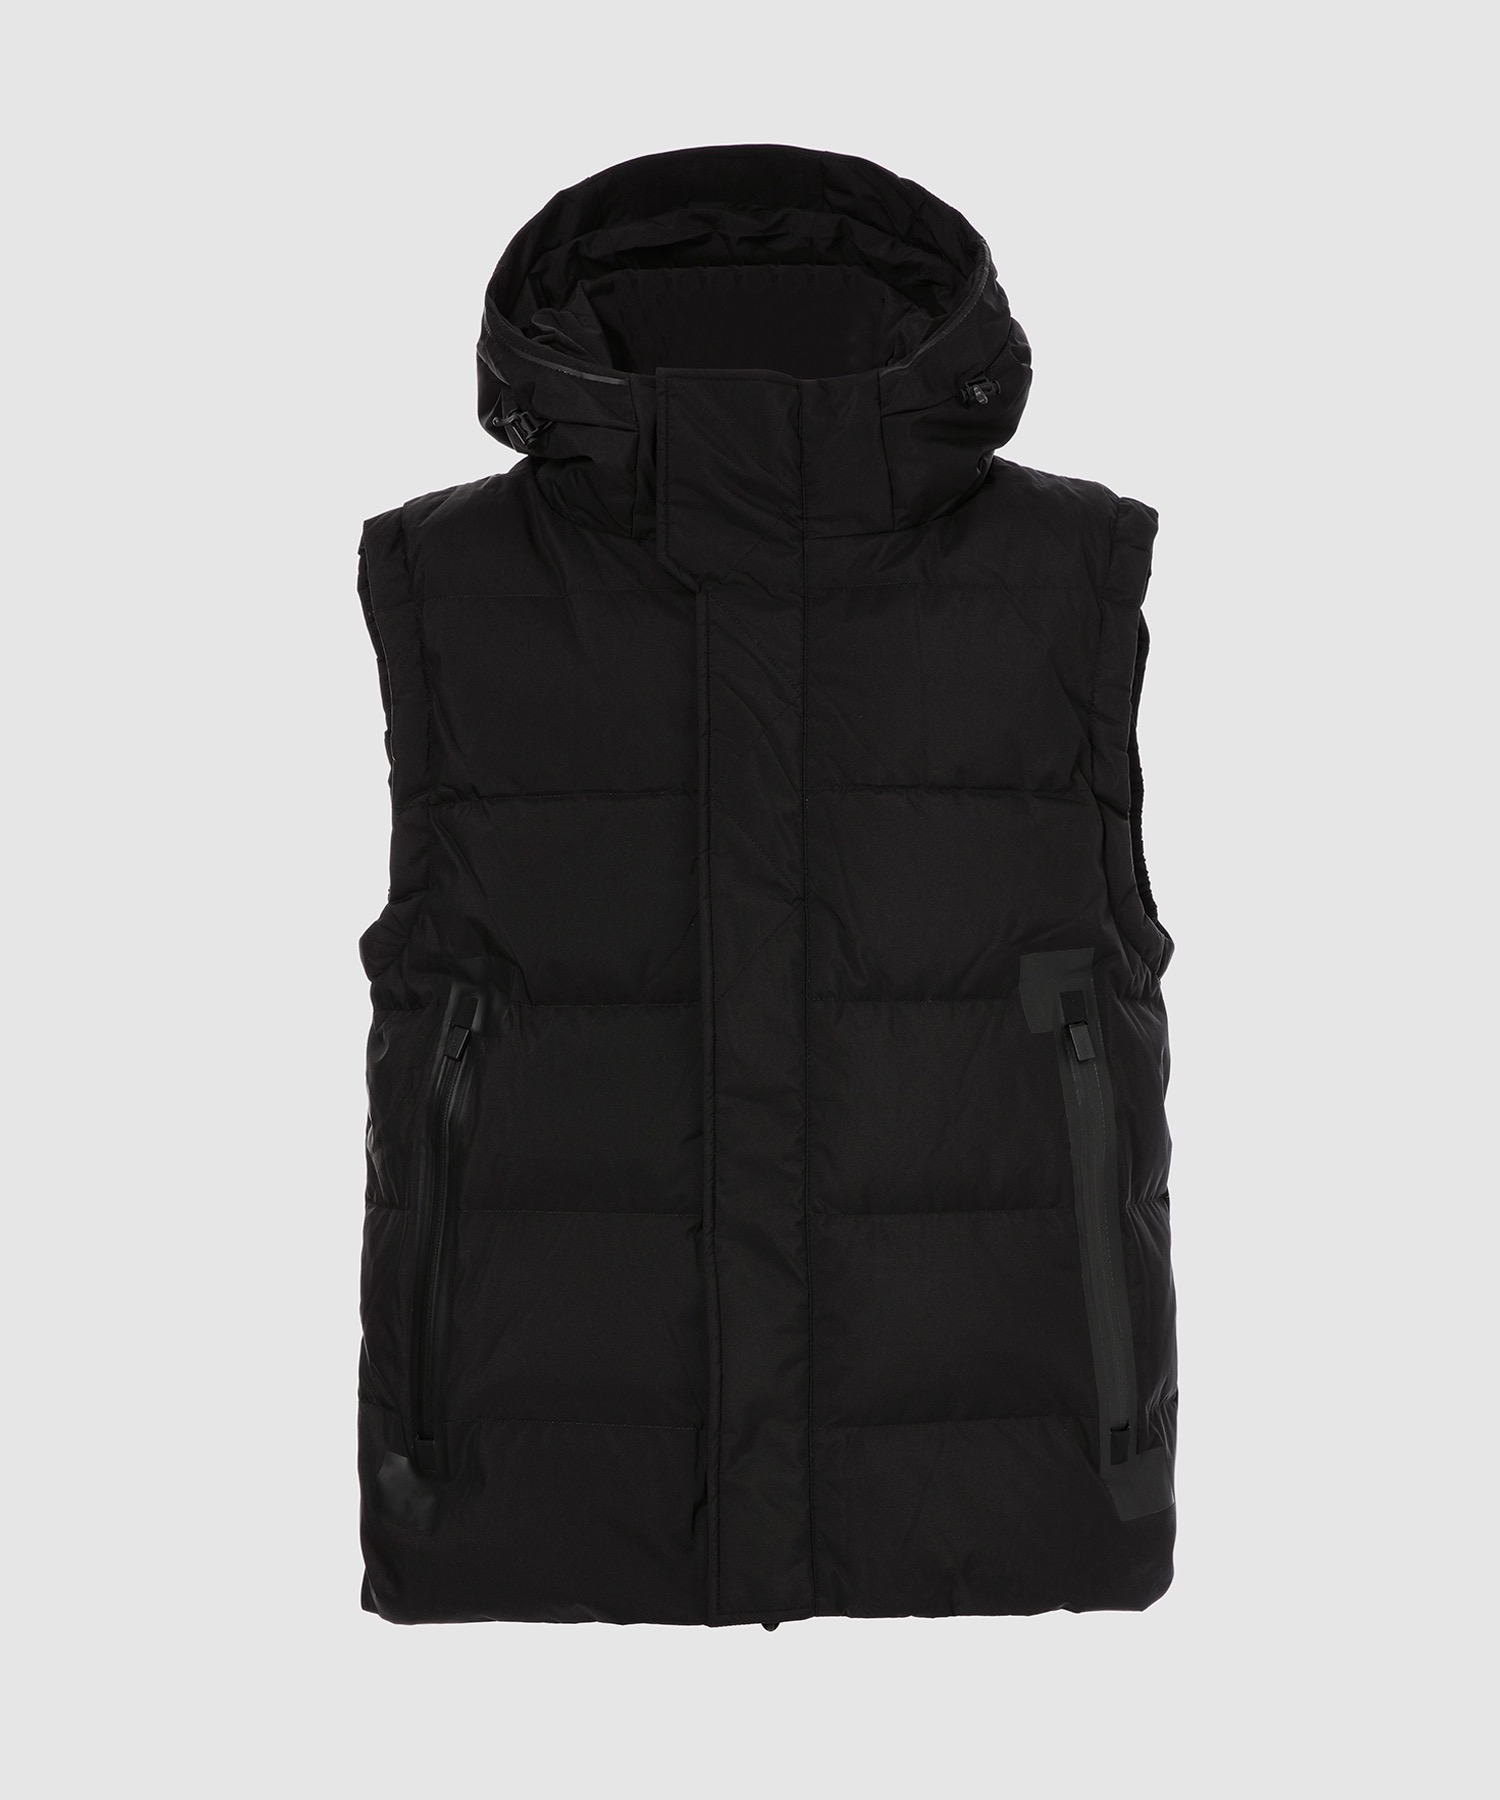 TEMPLALANG PUFFER 【75%OFF!】 驚きの値段 VEST